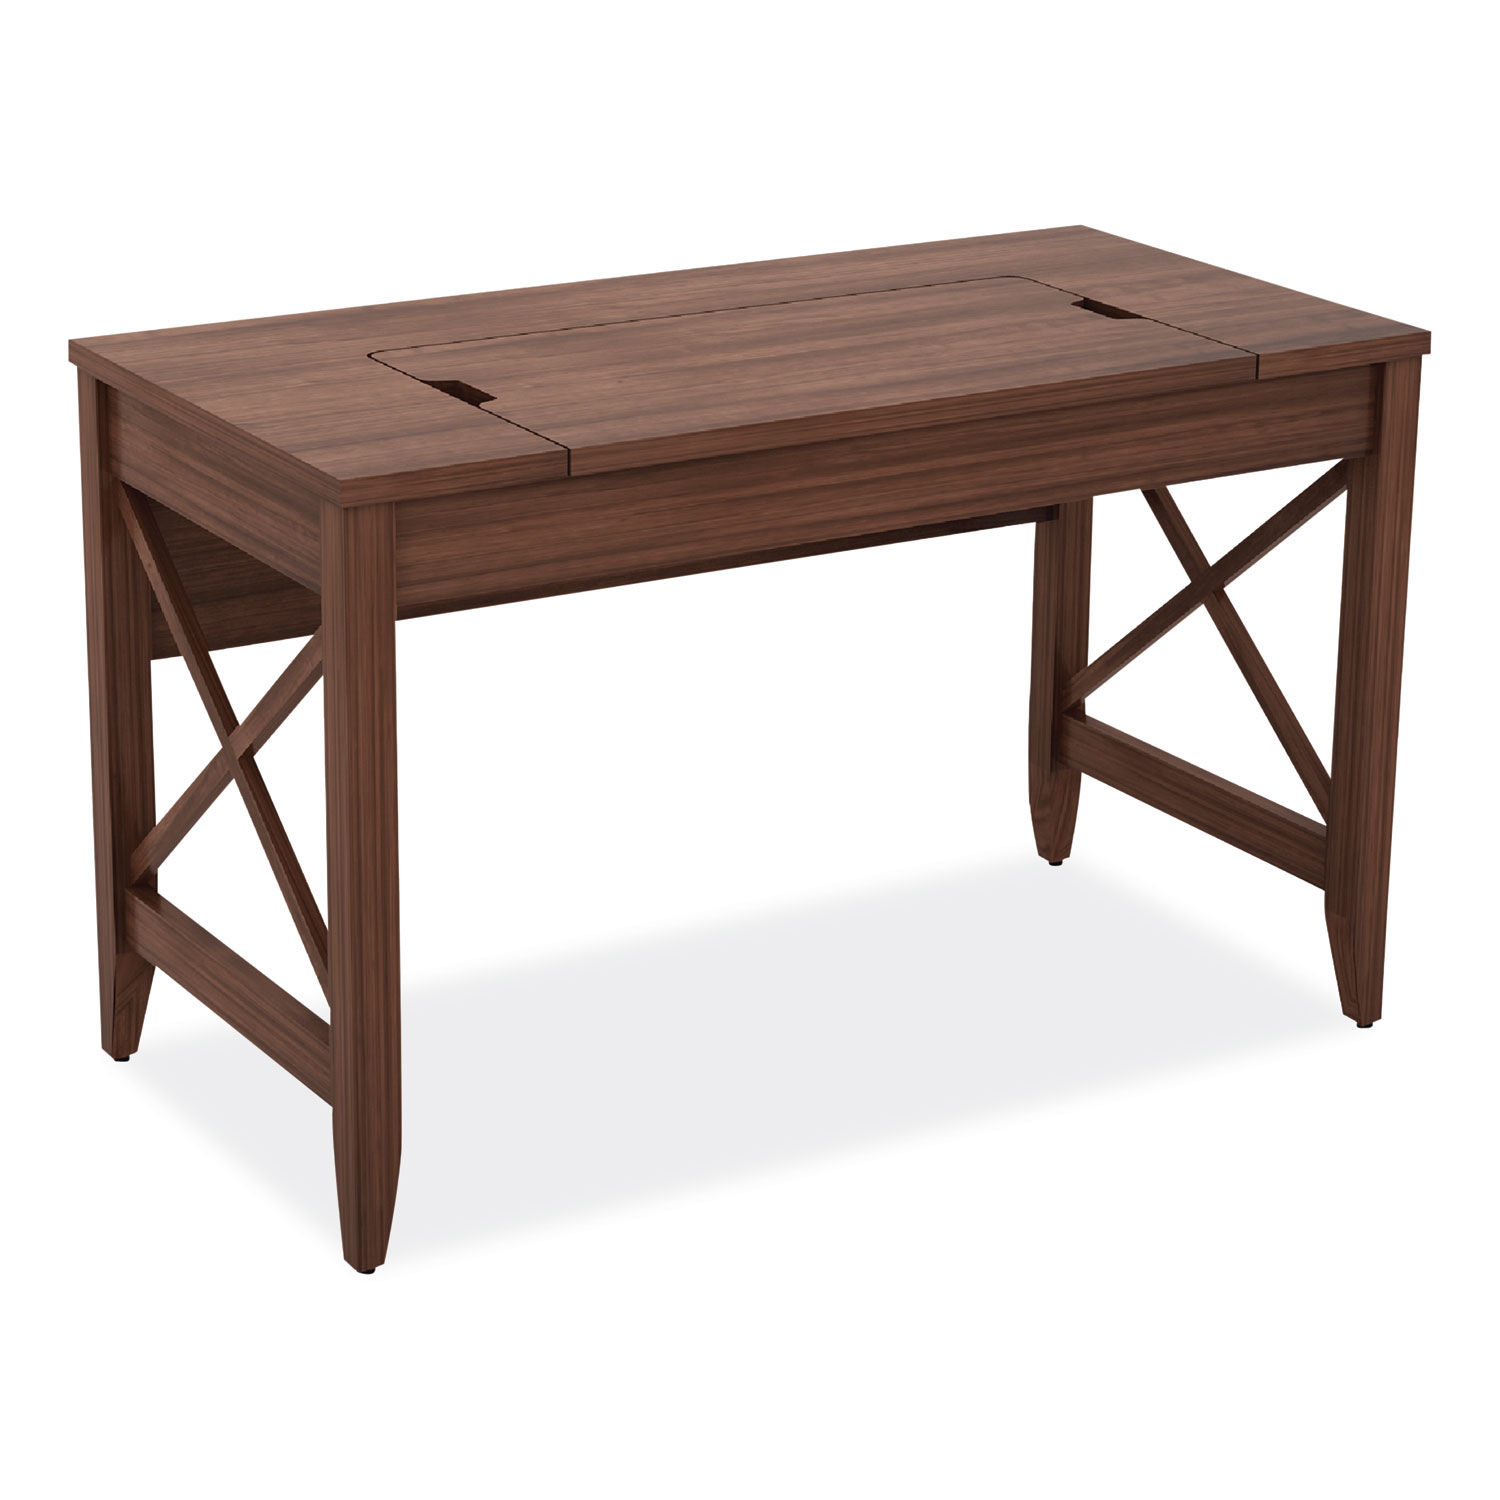 Sit-to-Stand Table Desk 47.25" x 23.63" x 29.5" to 43.75", Modern Walnut